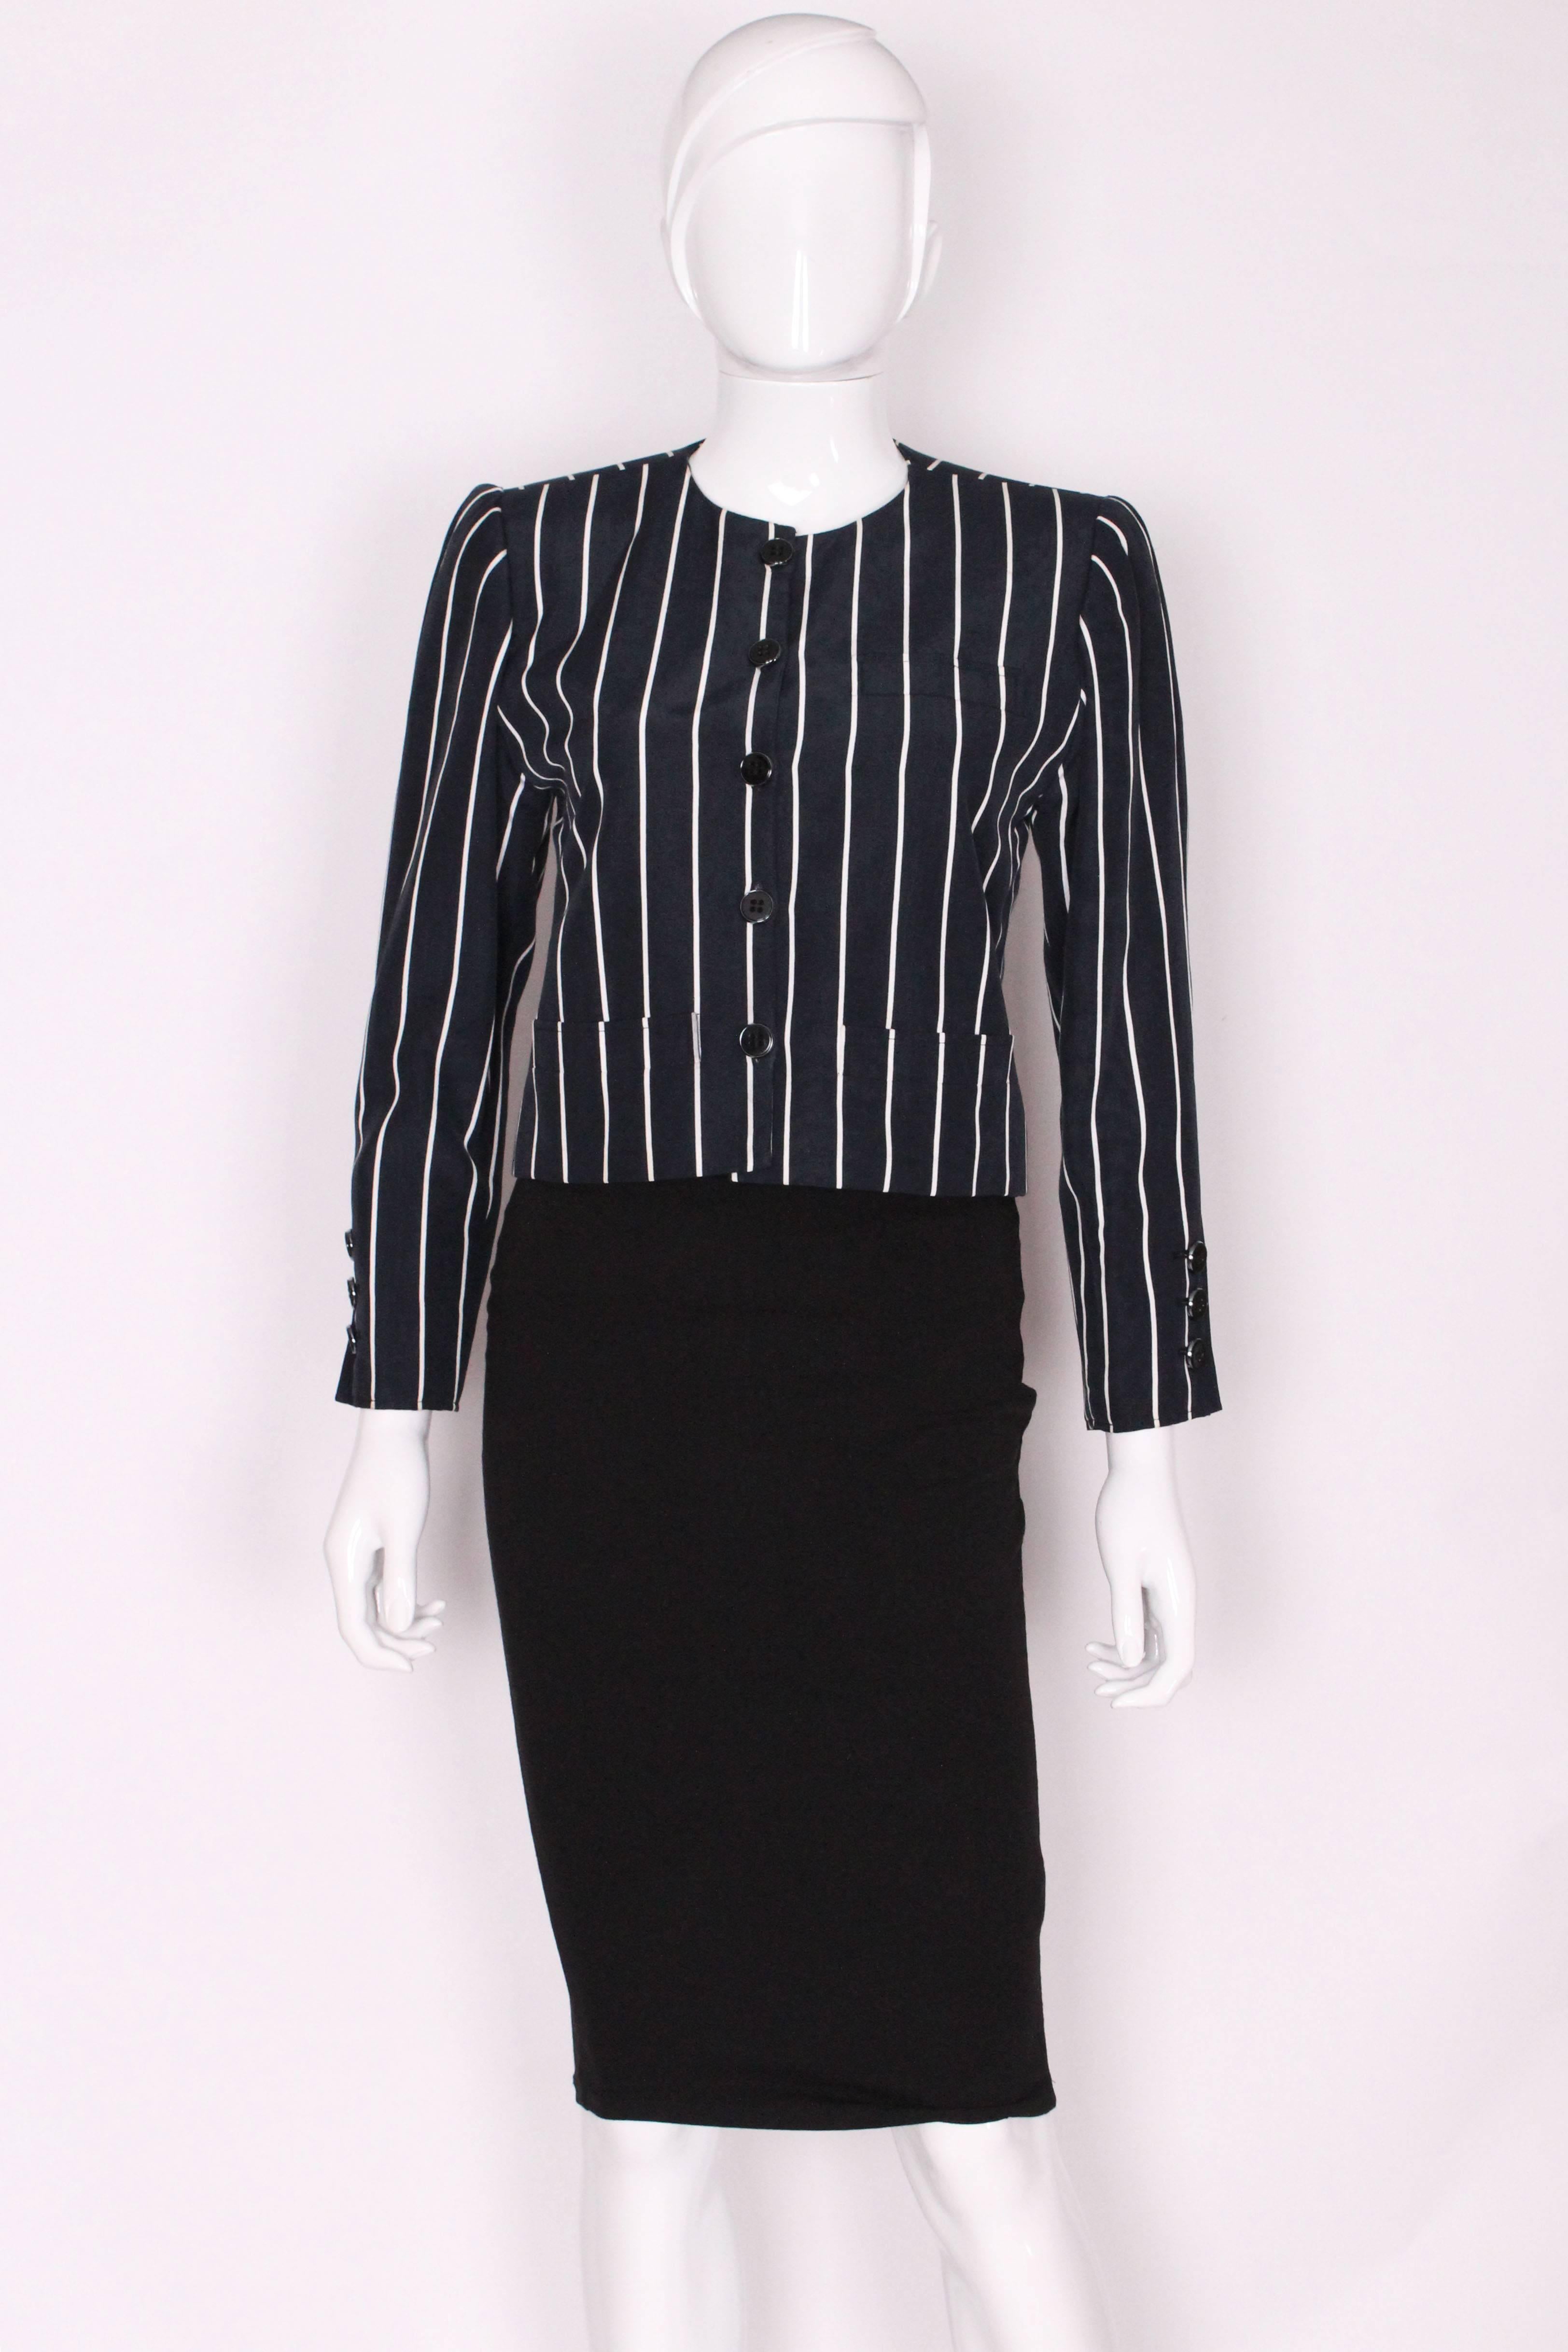 A 1980s but chic , jacket from Yves Saint Laurent, Rive Gauche line.
The jacket is in a dark navy blue with vertical white strips. It has three pockets, one on the left breast and two at waist leval,either side of the central buttons.
It has a five